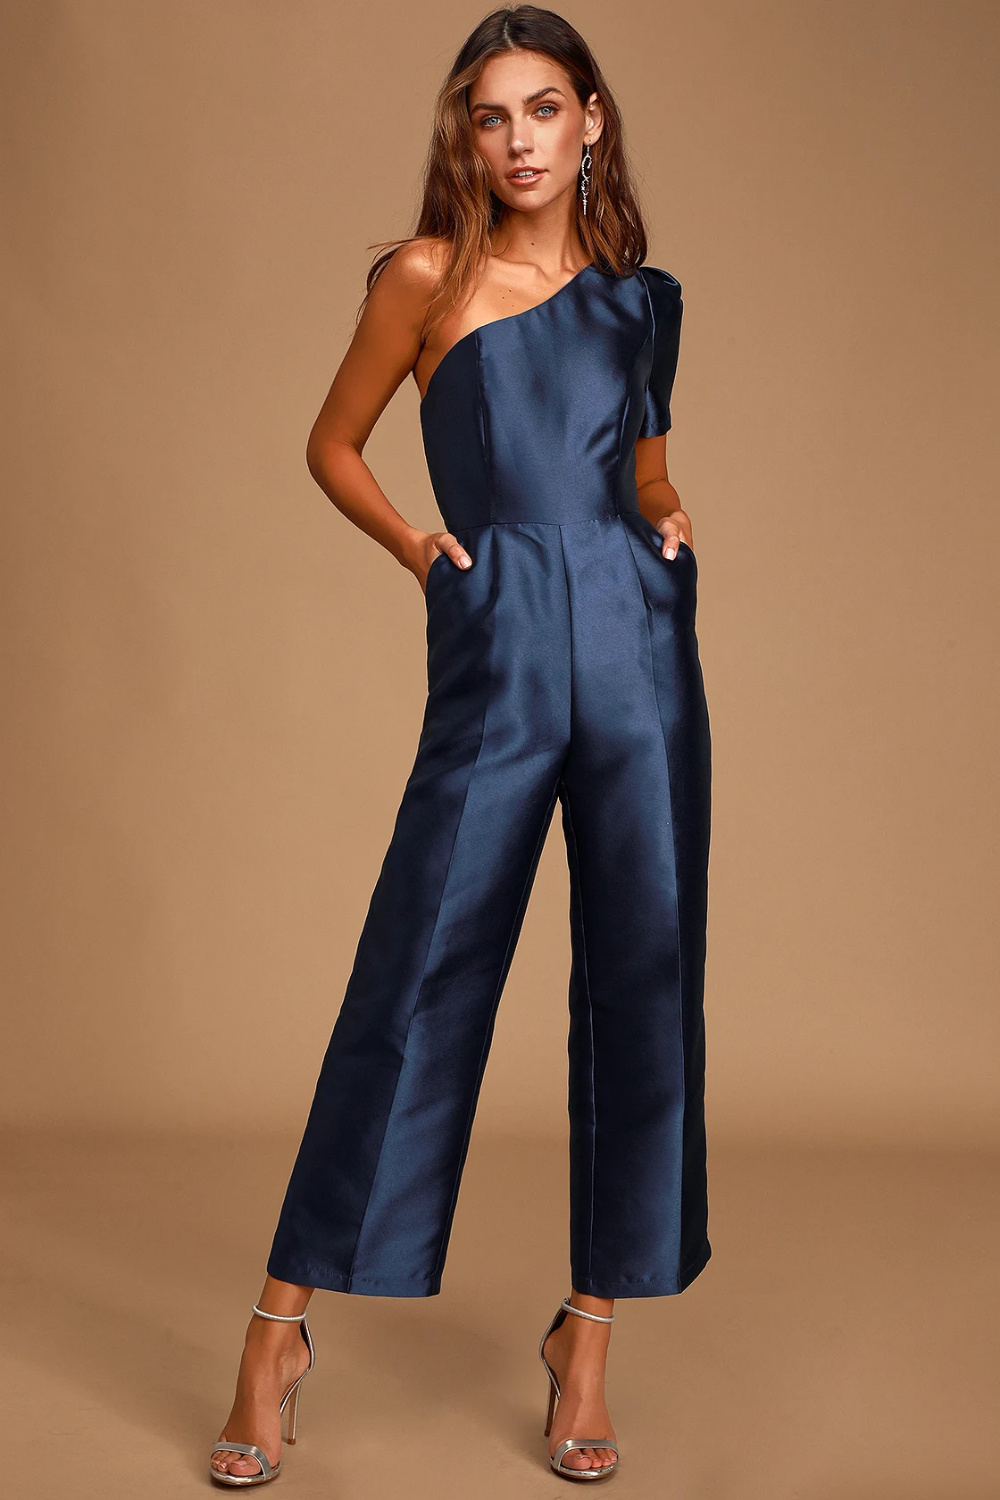 Stylish Blue Romper and Jumpsuit Outfits for Every Occasion